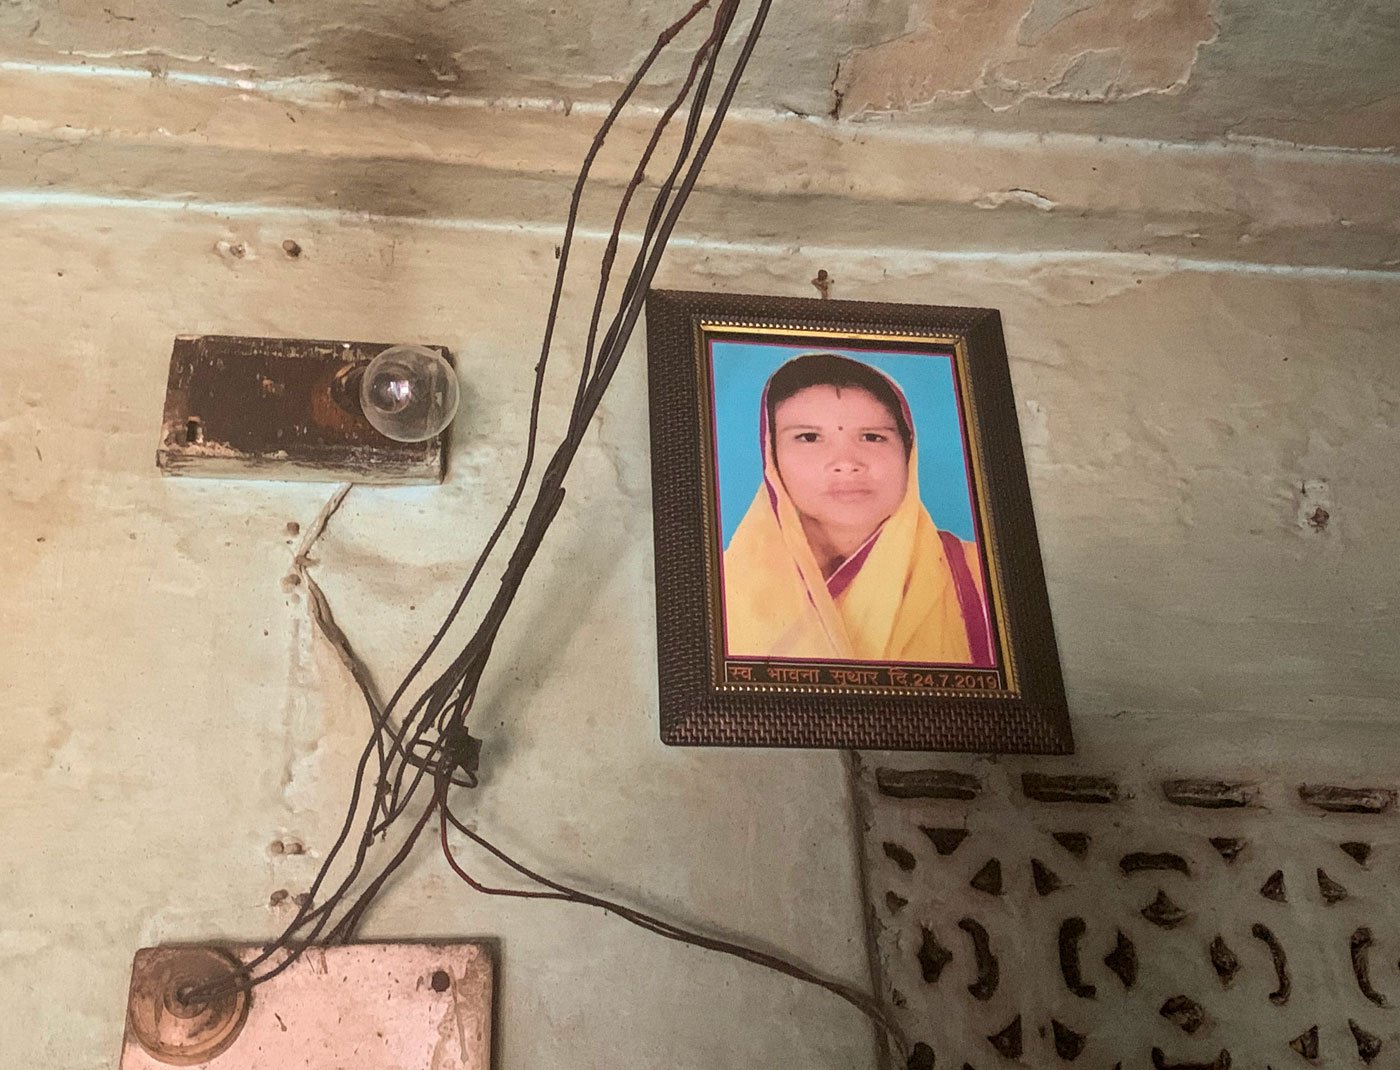 Bhavna Suthar underwent permanent sterilisation at the CHC in Bari Sadri on July 16, 2019; she died a week later

